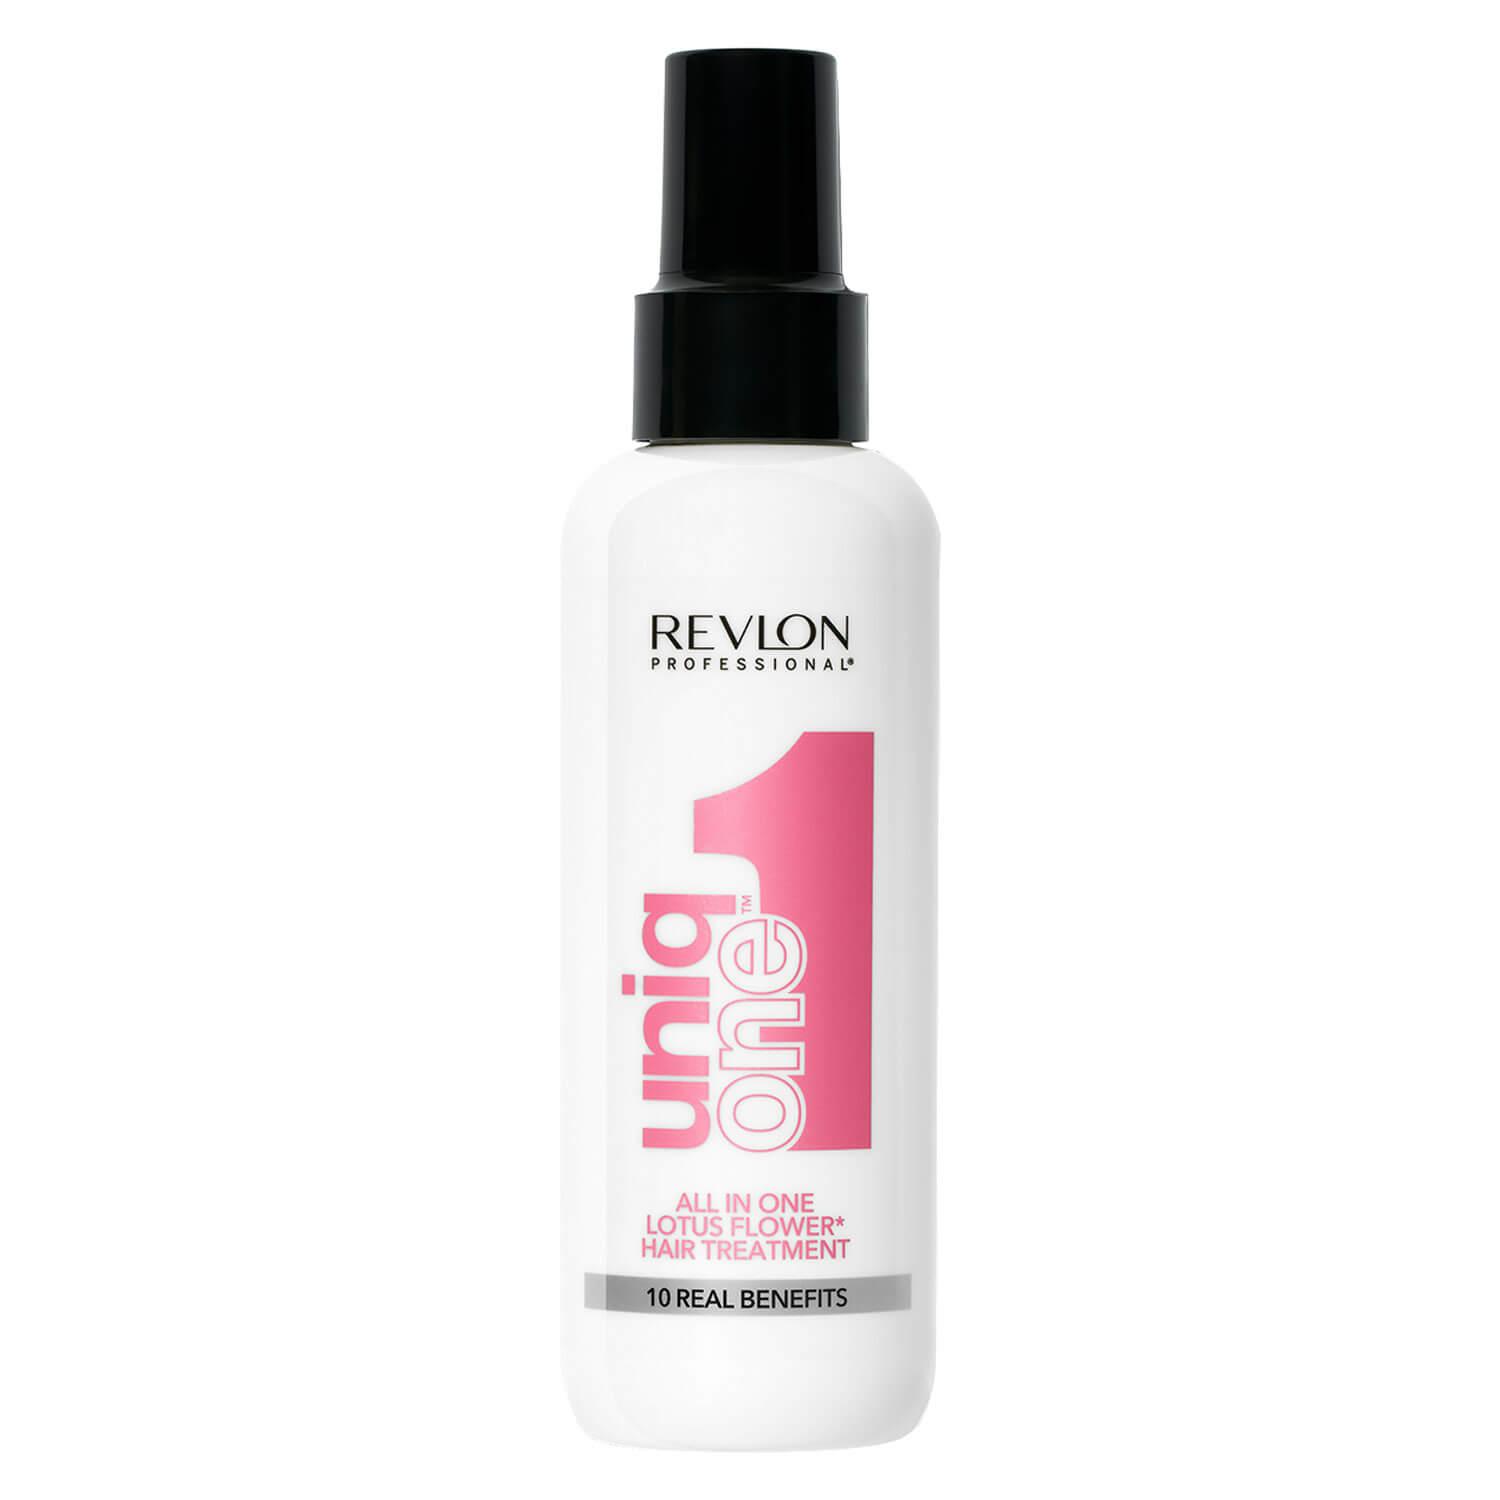 uniq one - All in one Hair Treatment Lotus Flower